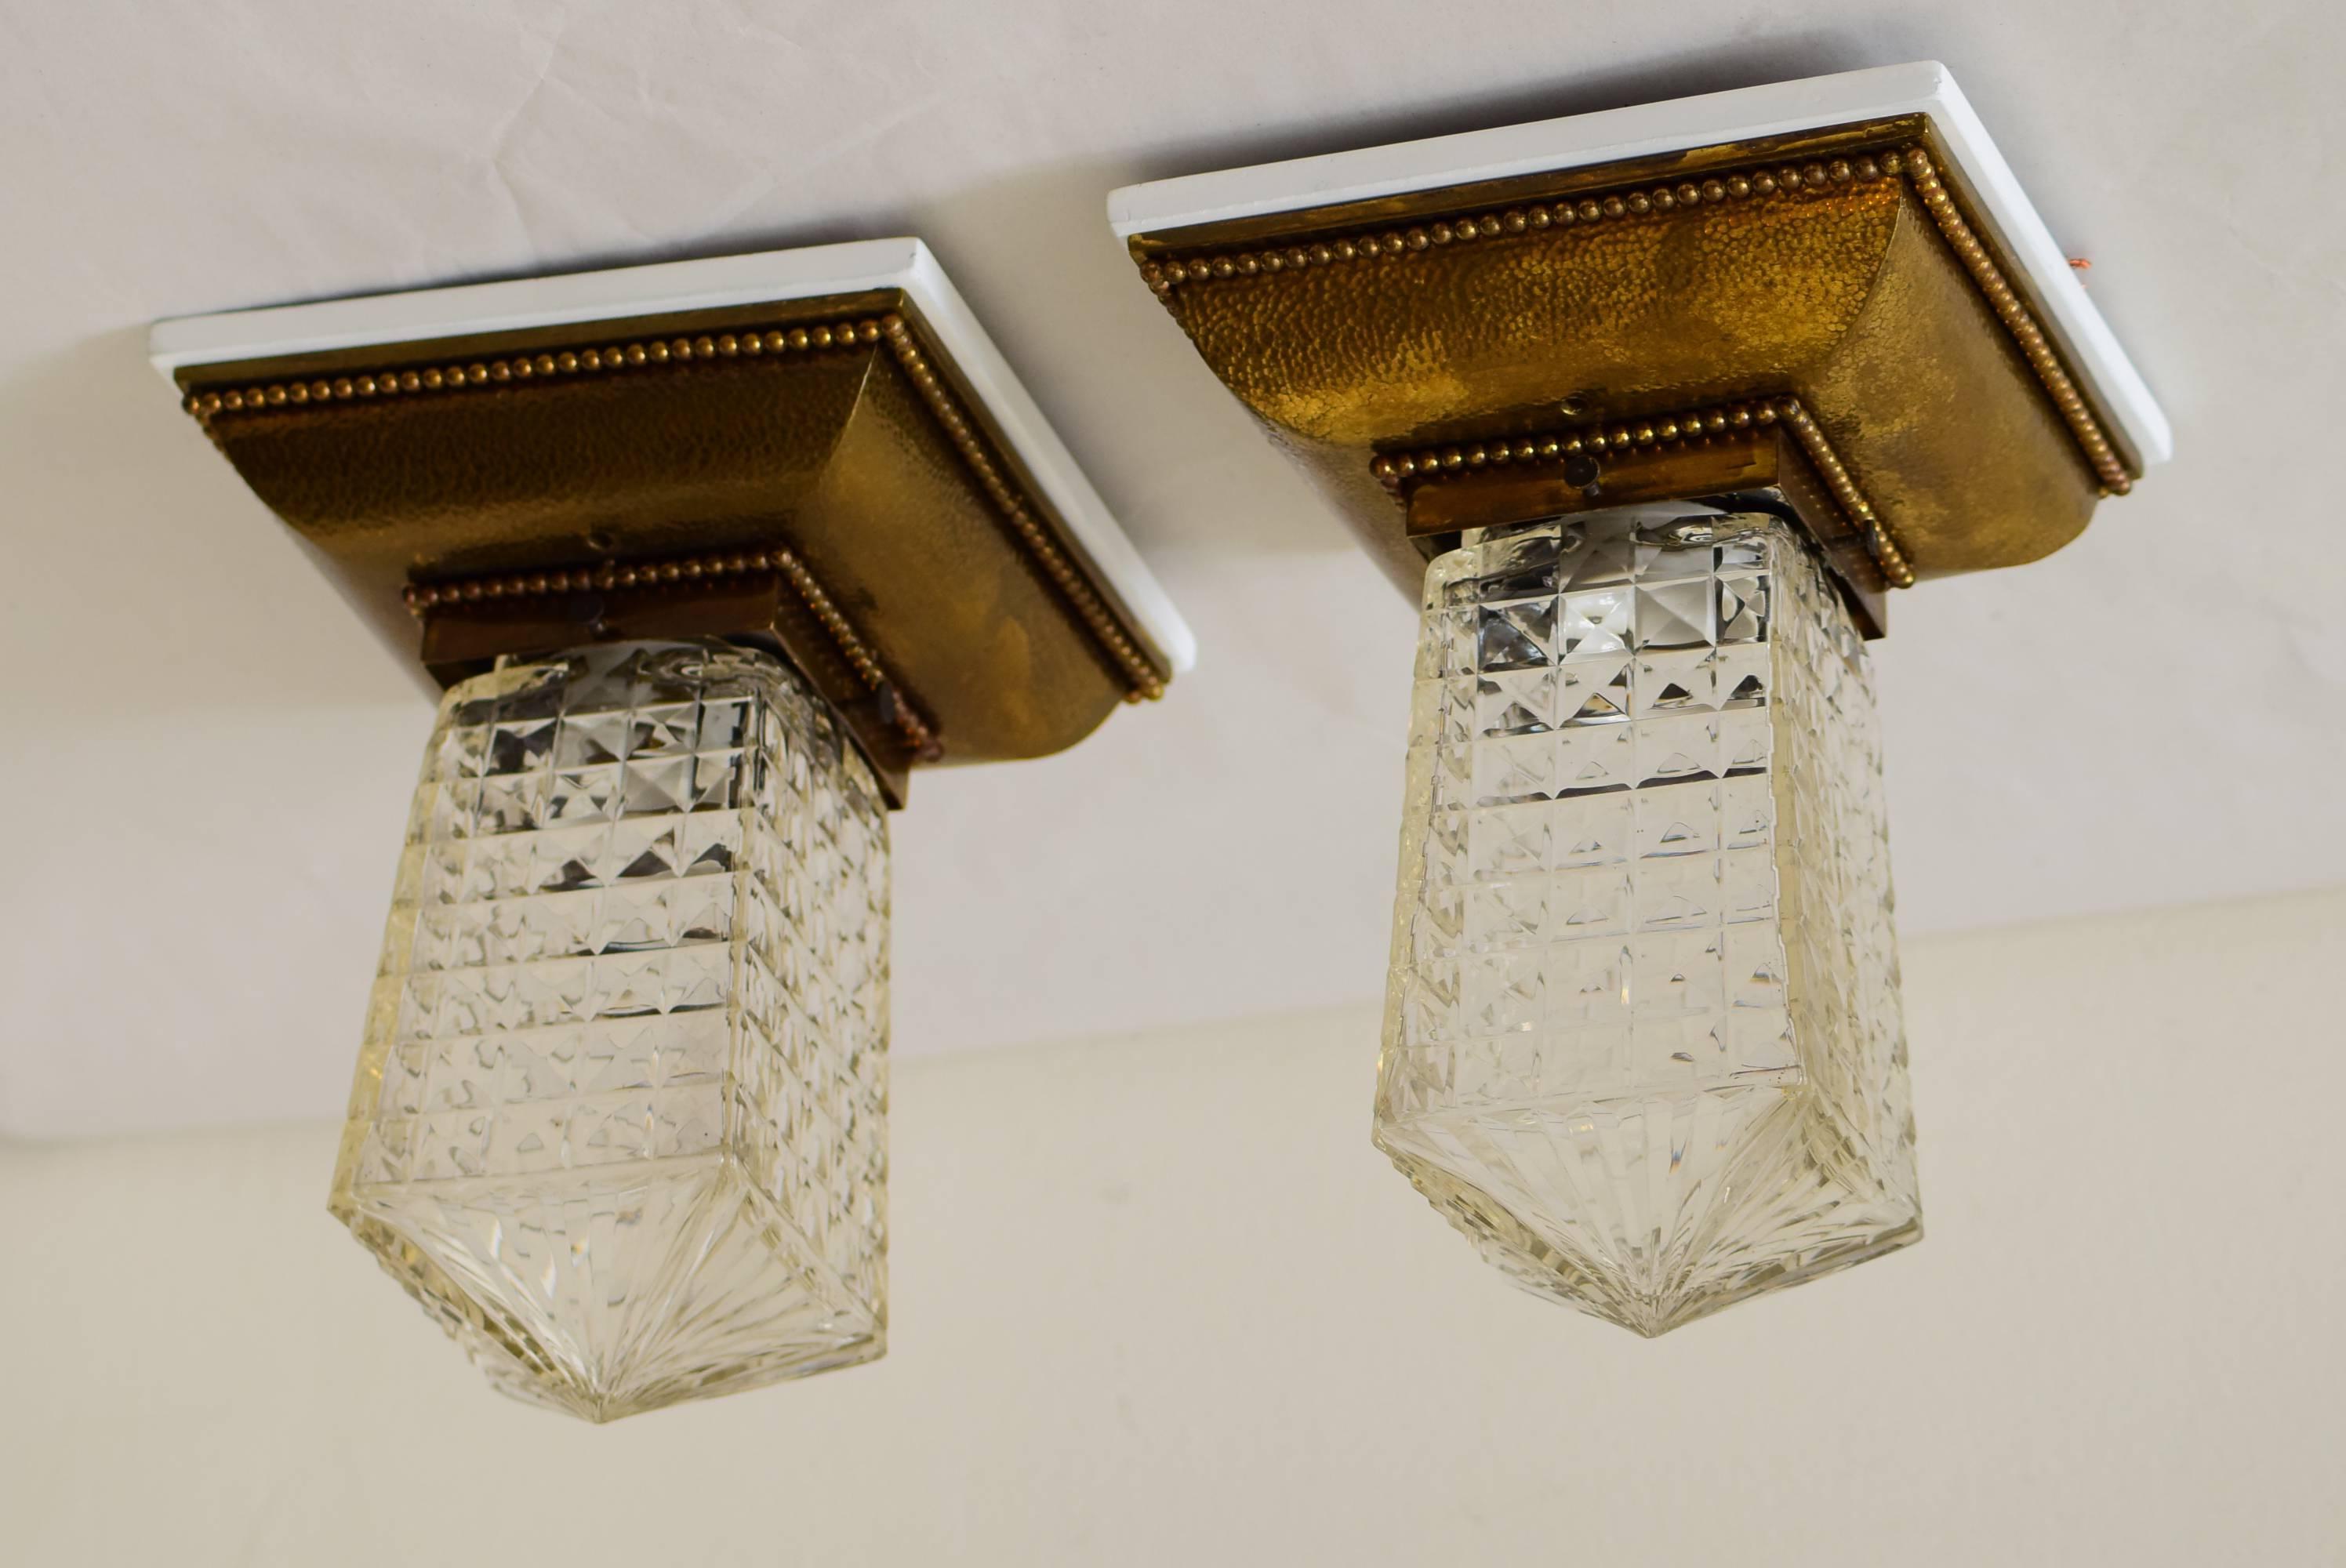 Two hammered ceiling lamp with cut glass.
Original condition.
Very nice original patina,
solid brass.
Wood painted white.